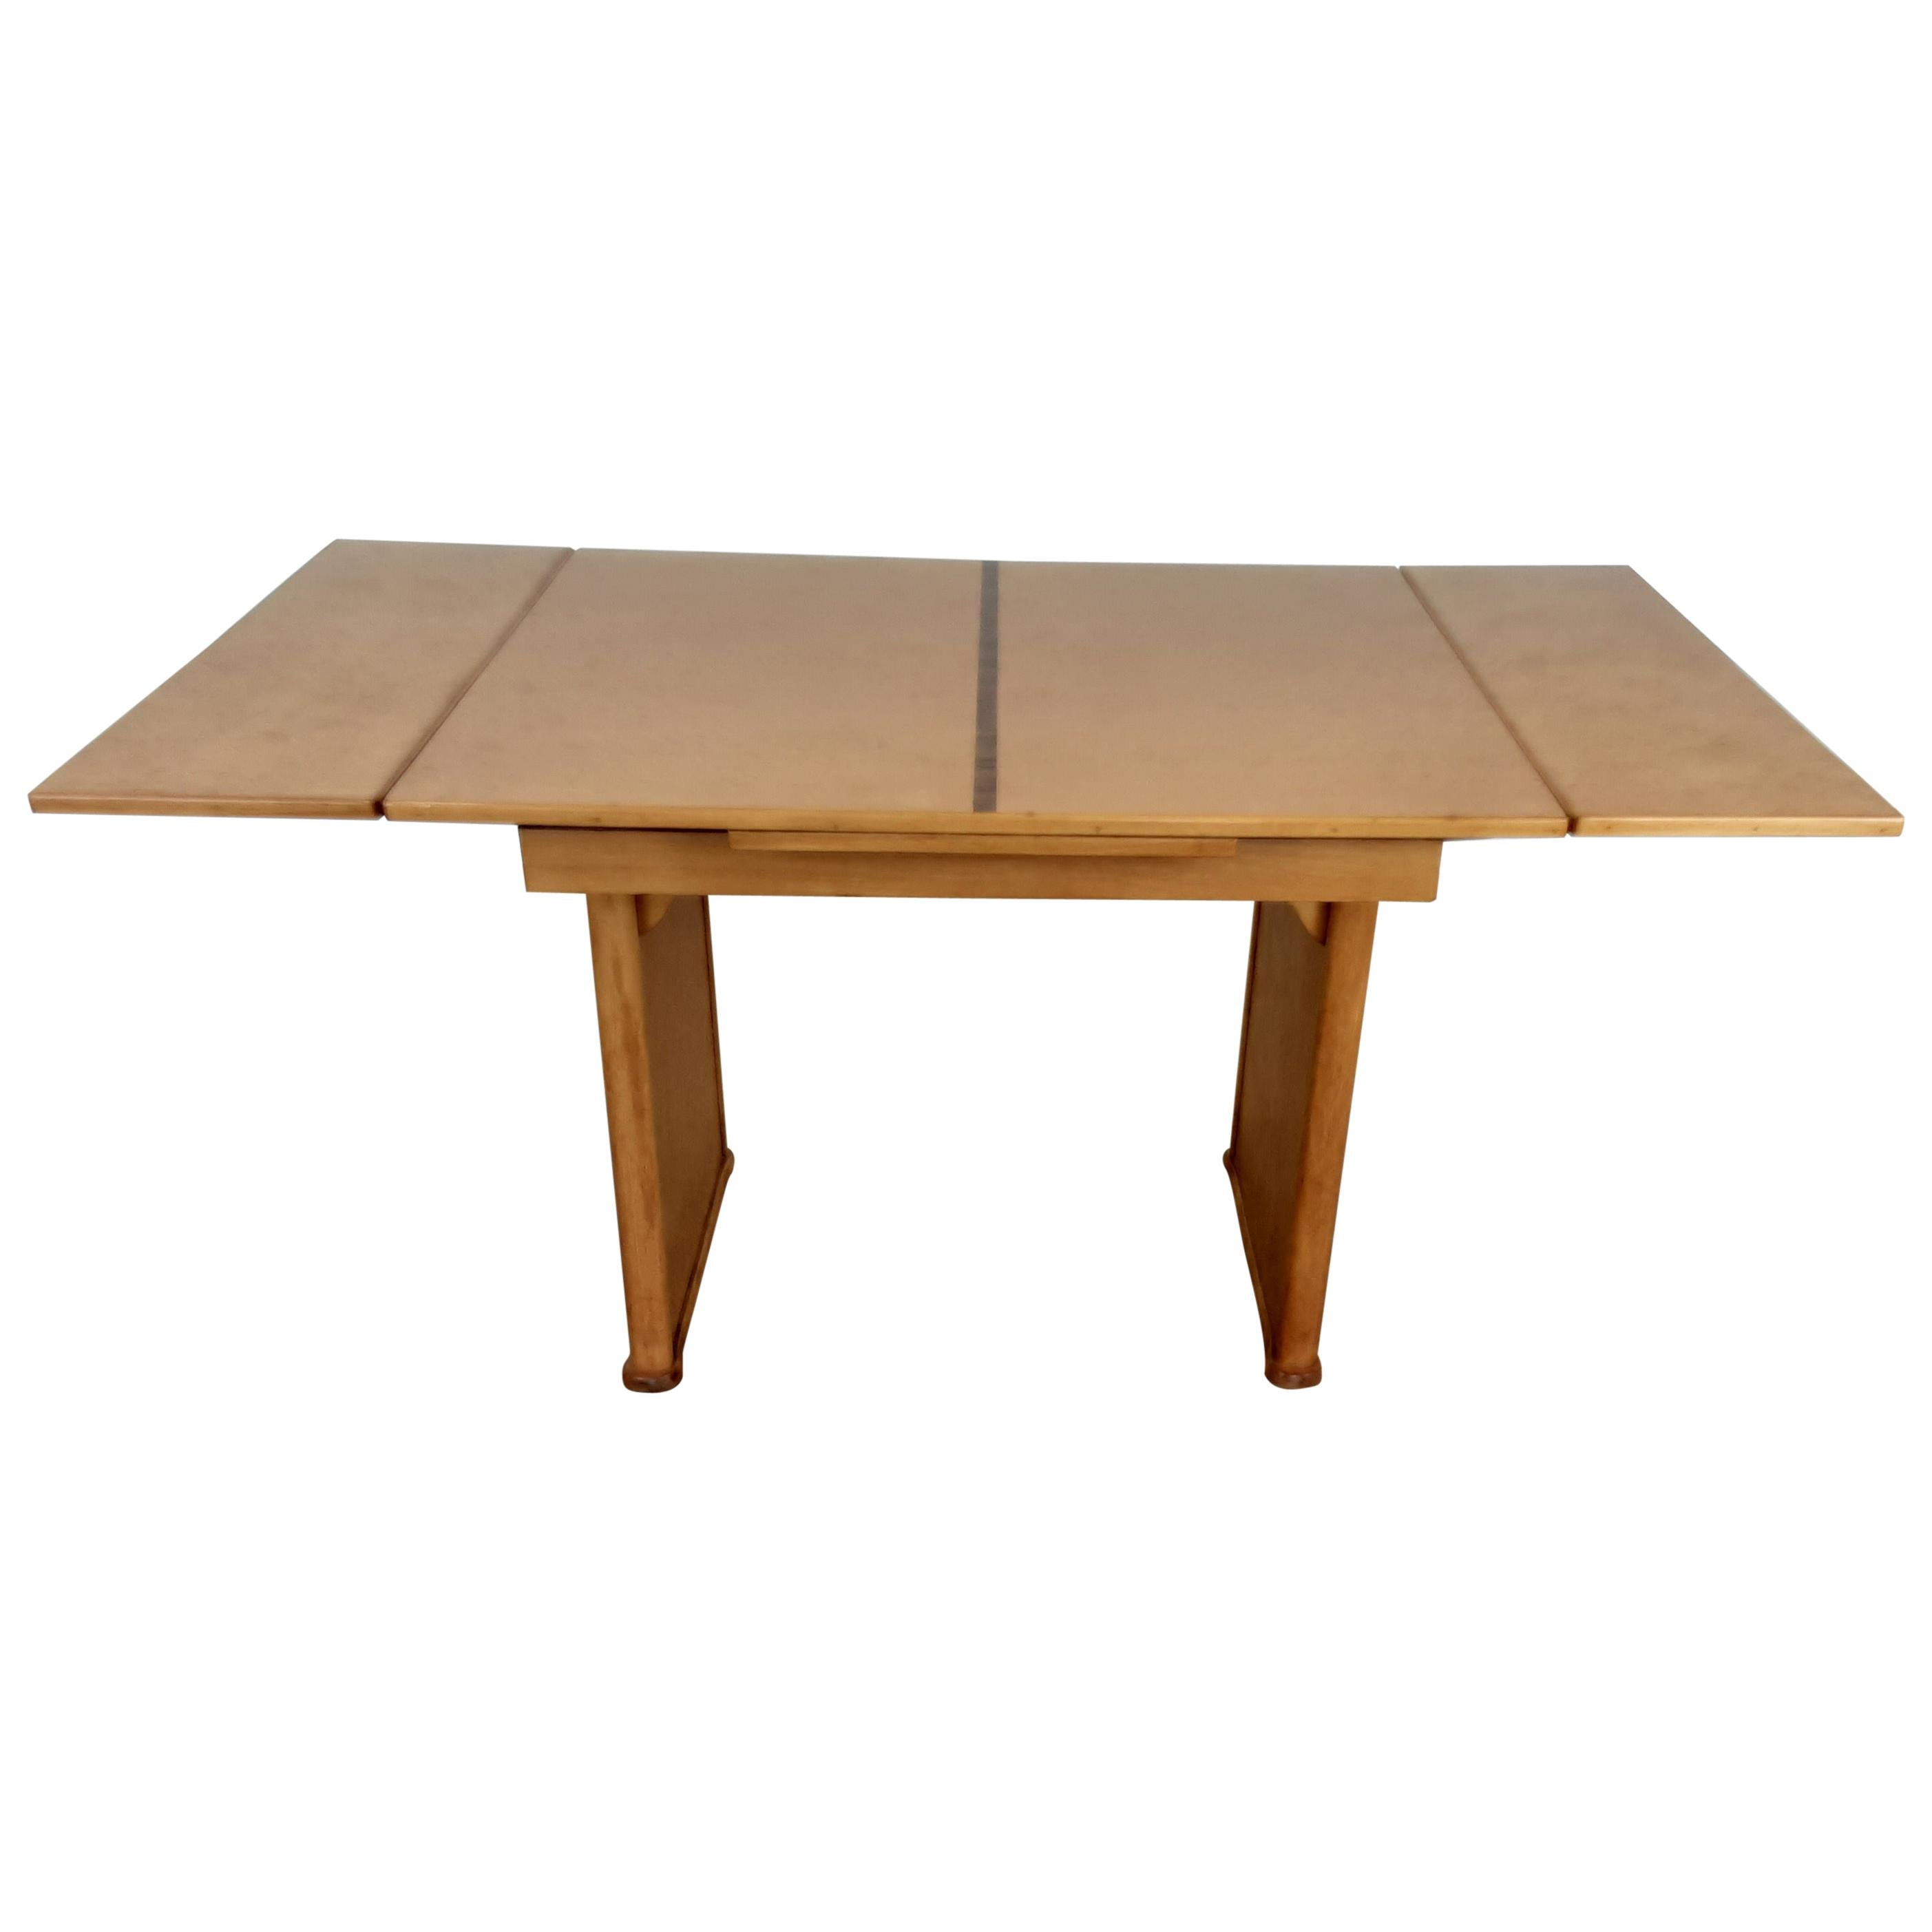 British Art Deco Extendable Dining Table in Bird's-Eye Maple with Walnut Trims For Sale